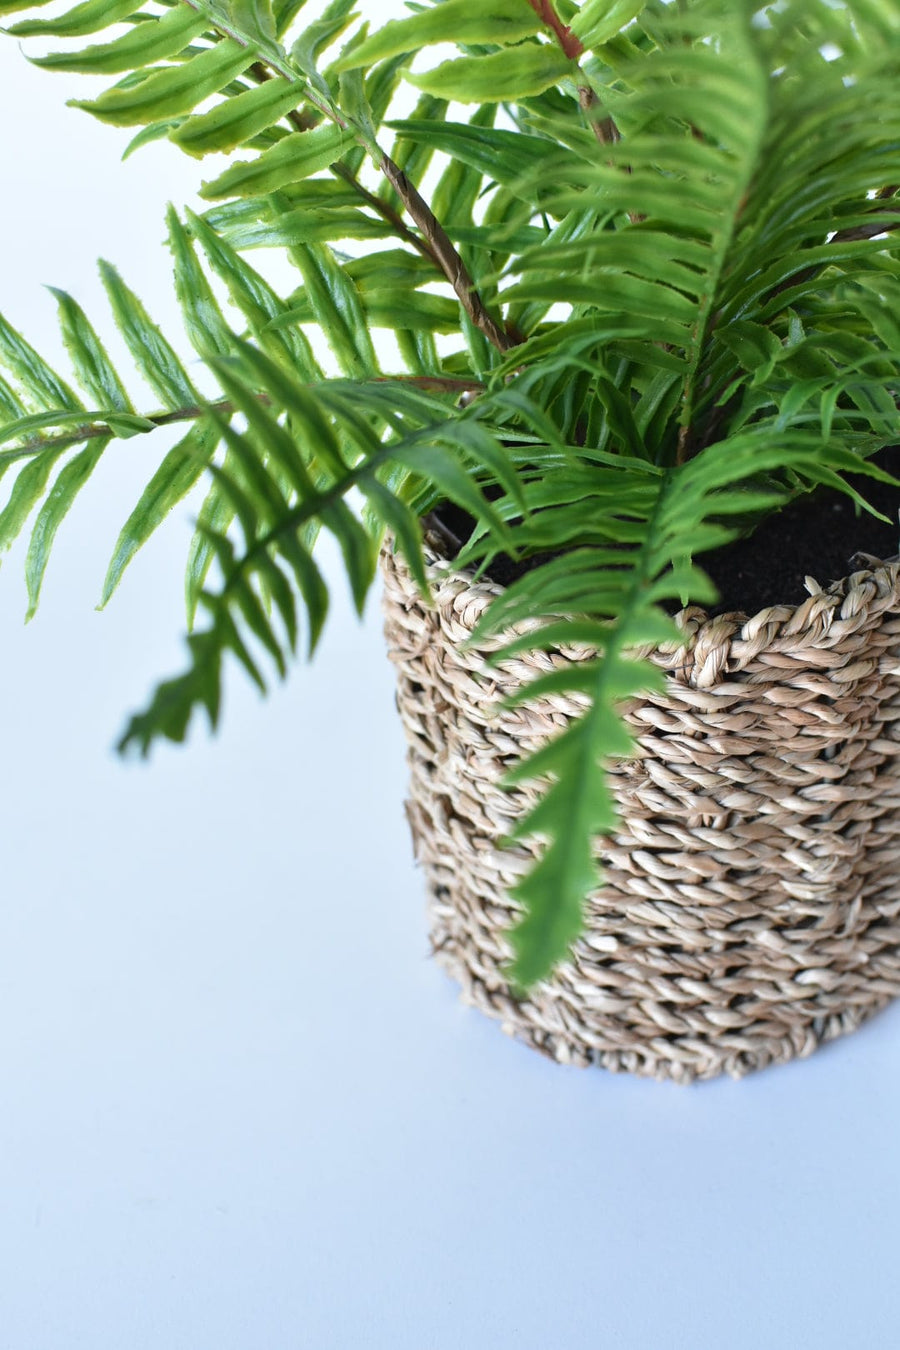 15" Faux Boston Fern in Seagrass Basket Container